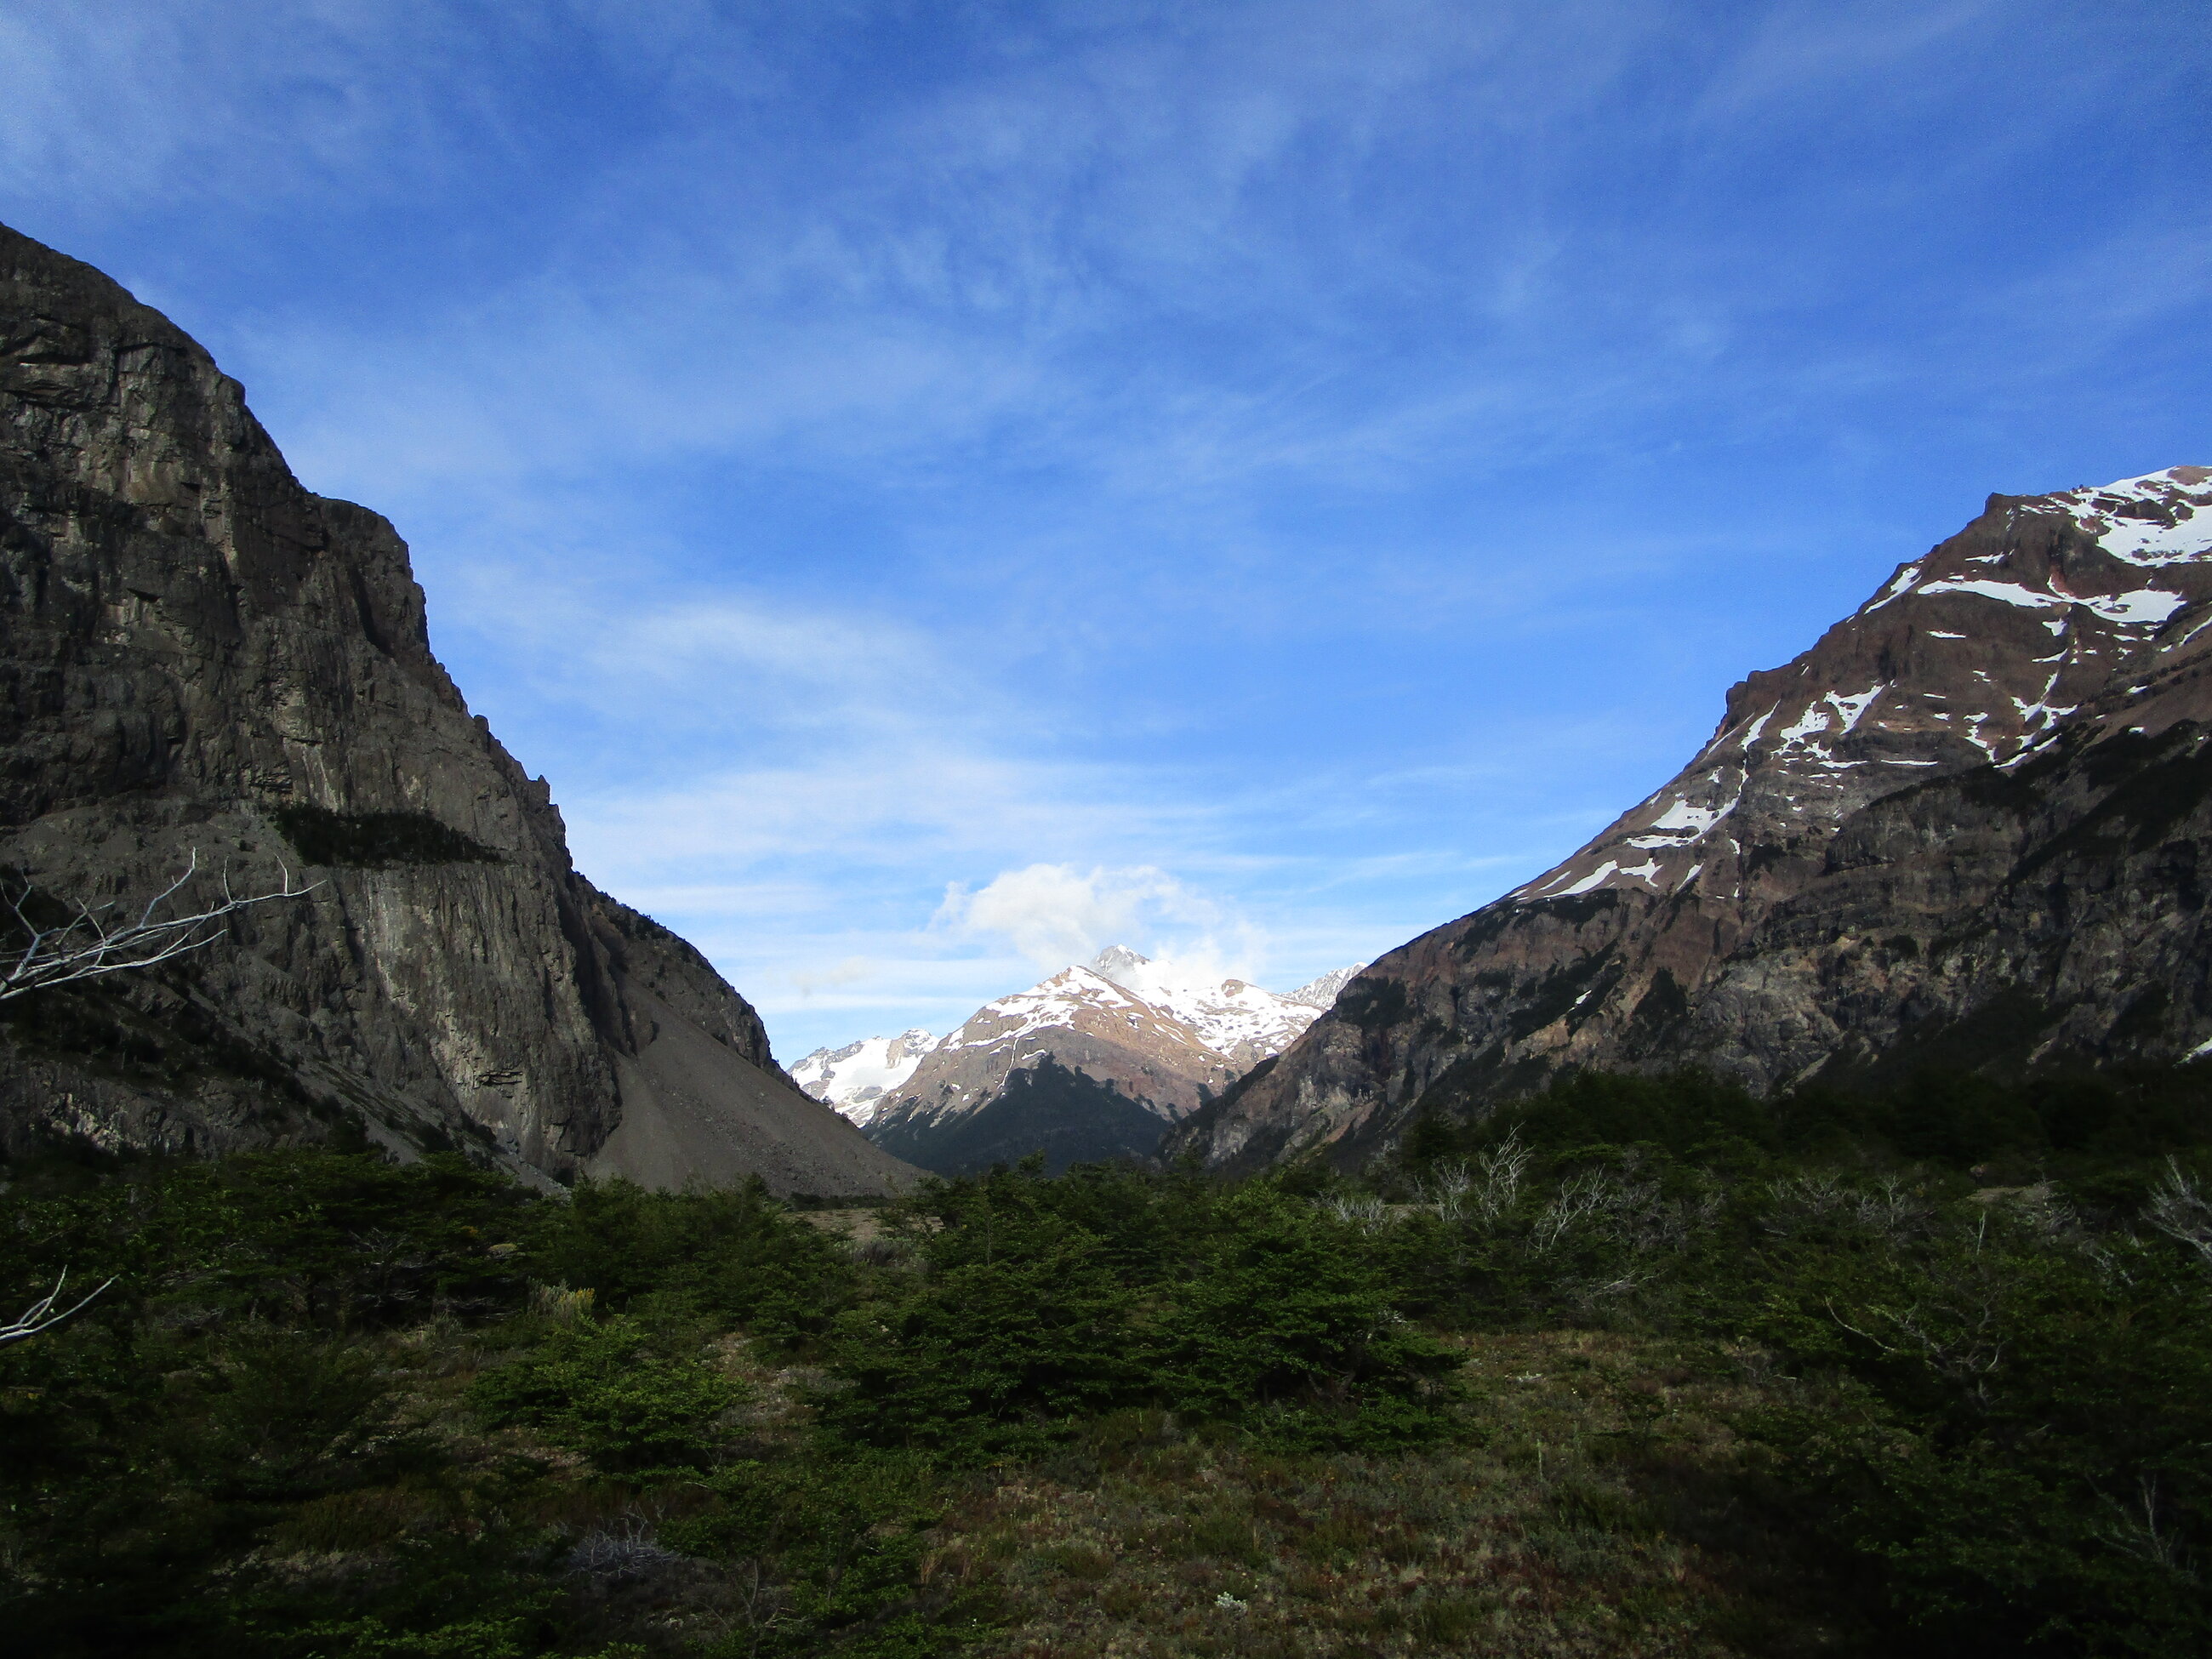 The mountains near Lago Verde in Patagonia